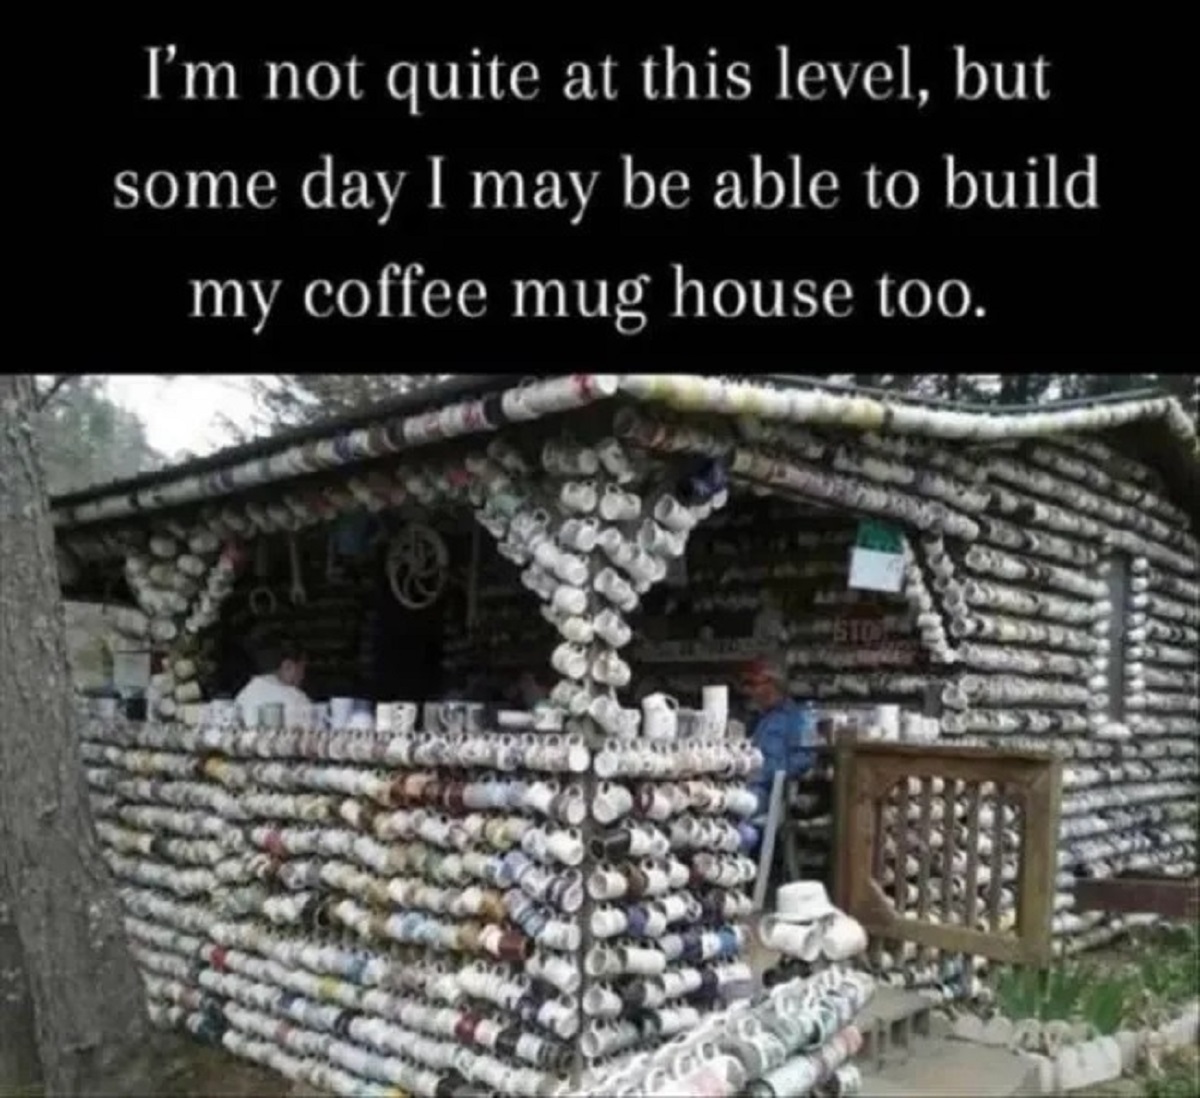 the collettsville cup house - I'm not quite at this level, but some day I may be able to build my coffee mug house too.